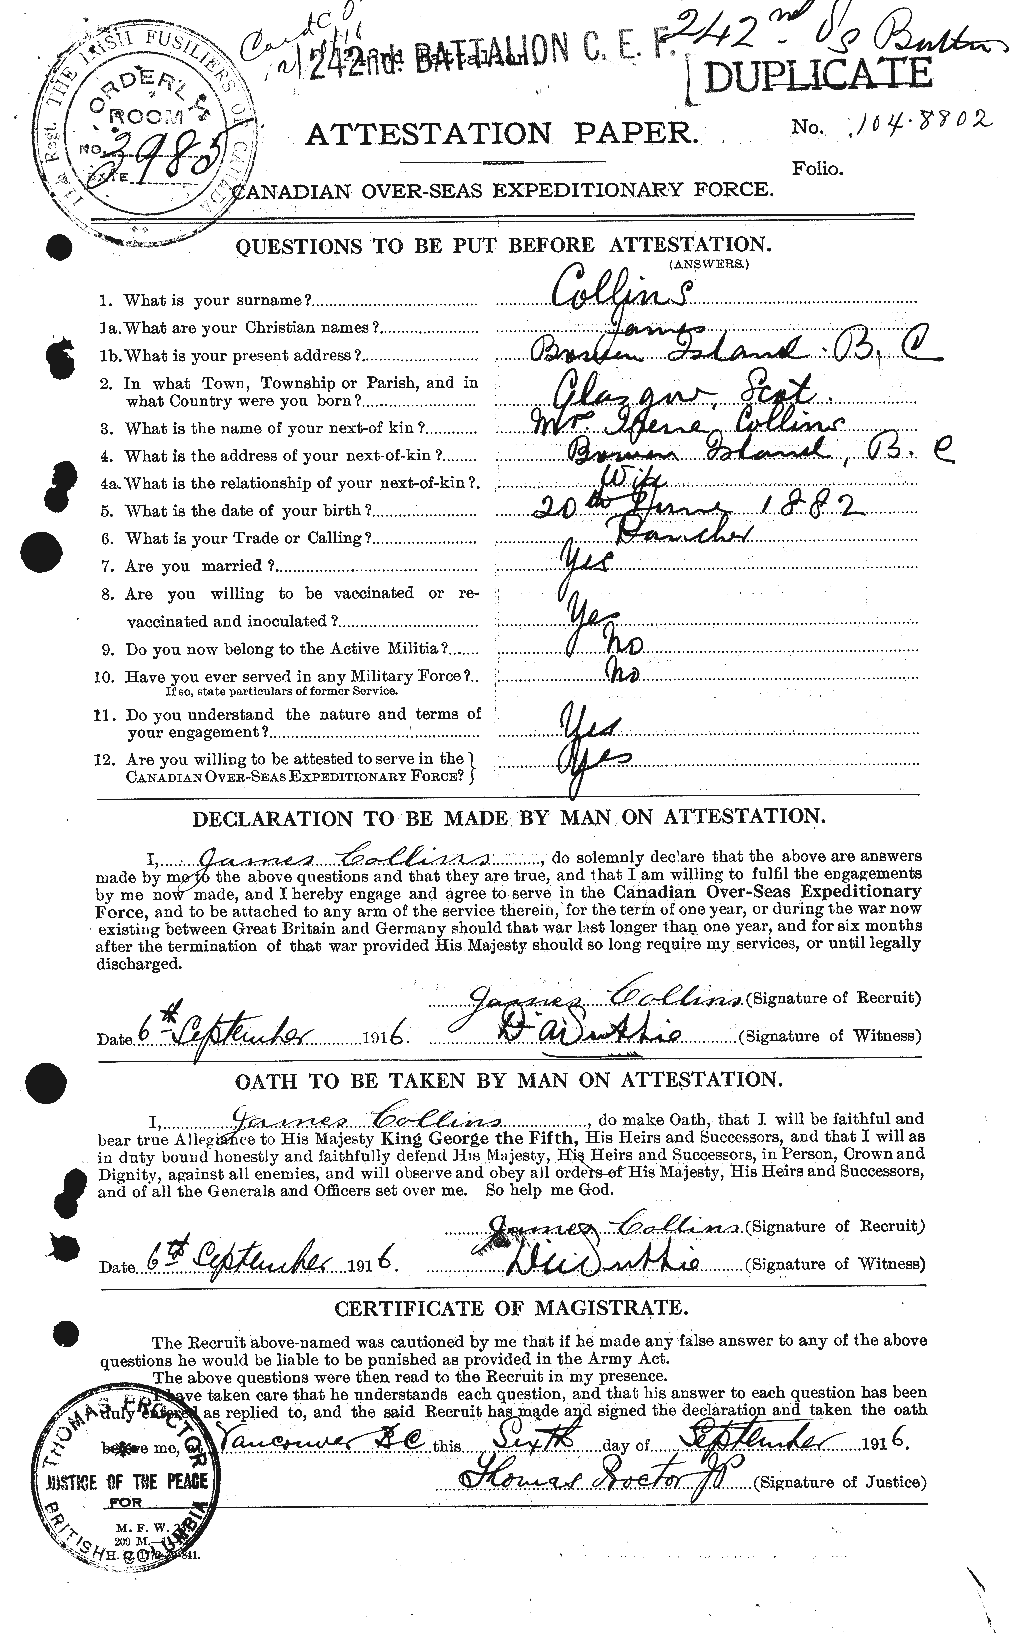 Personnel Records of the First World War - CEF 069969a